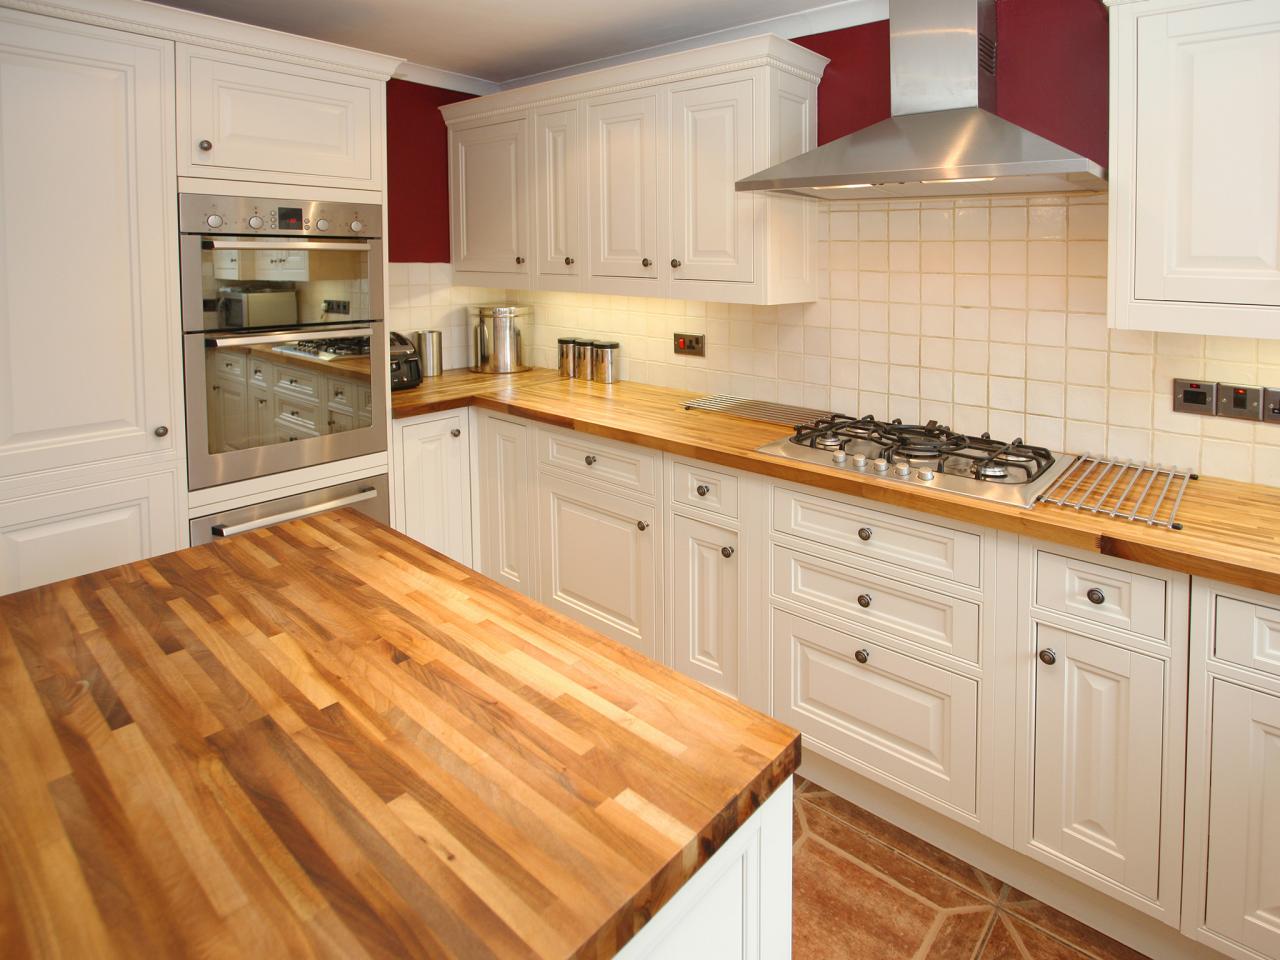 kitchen design with wood countertops